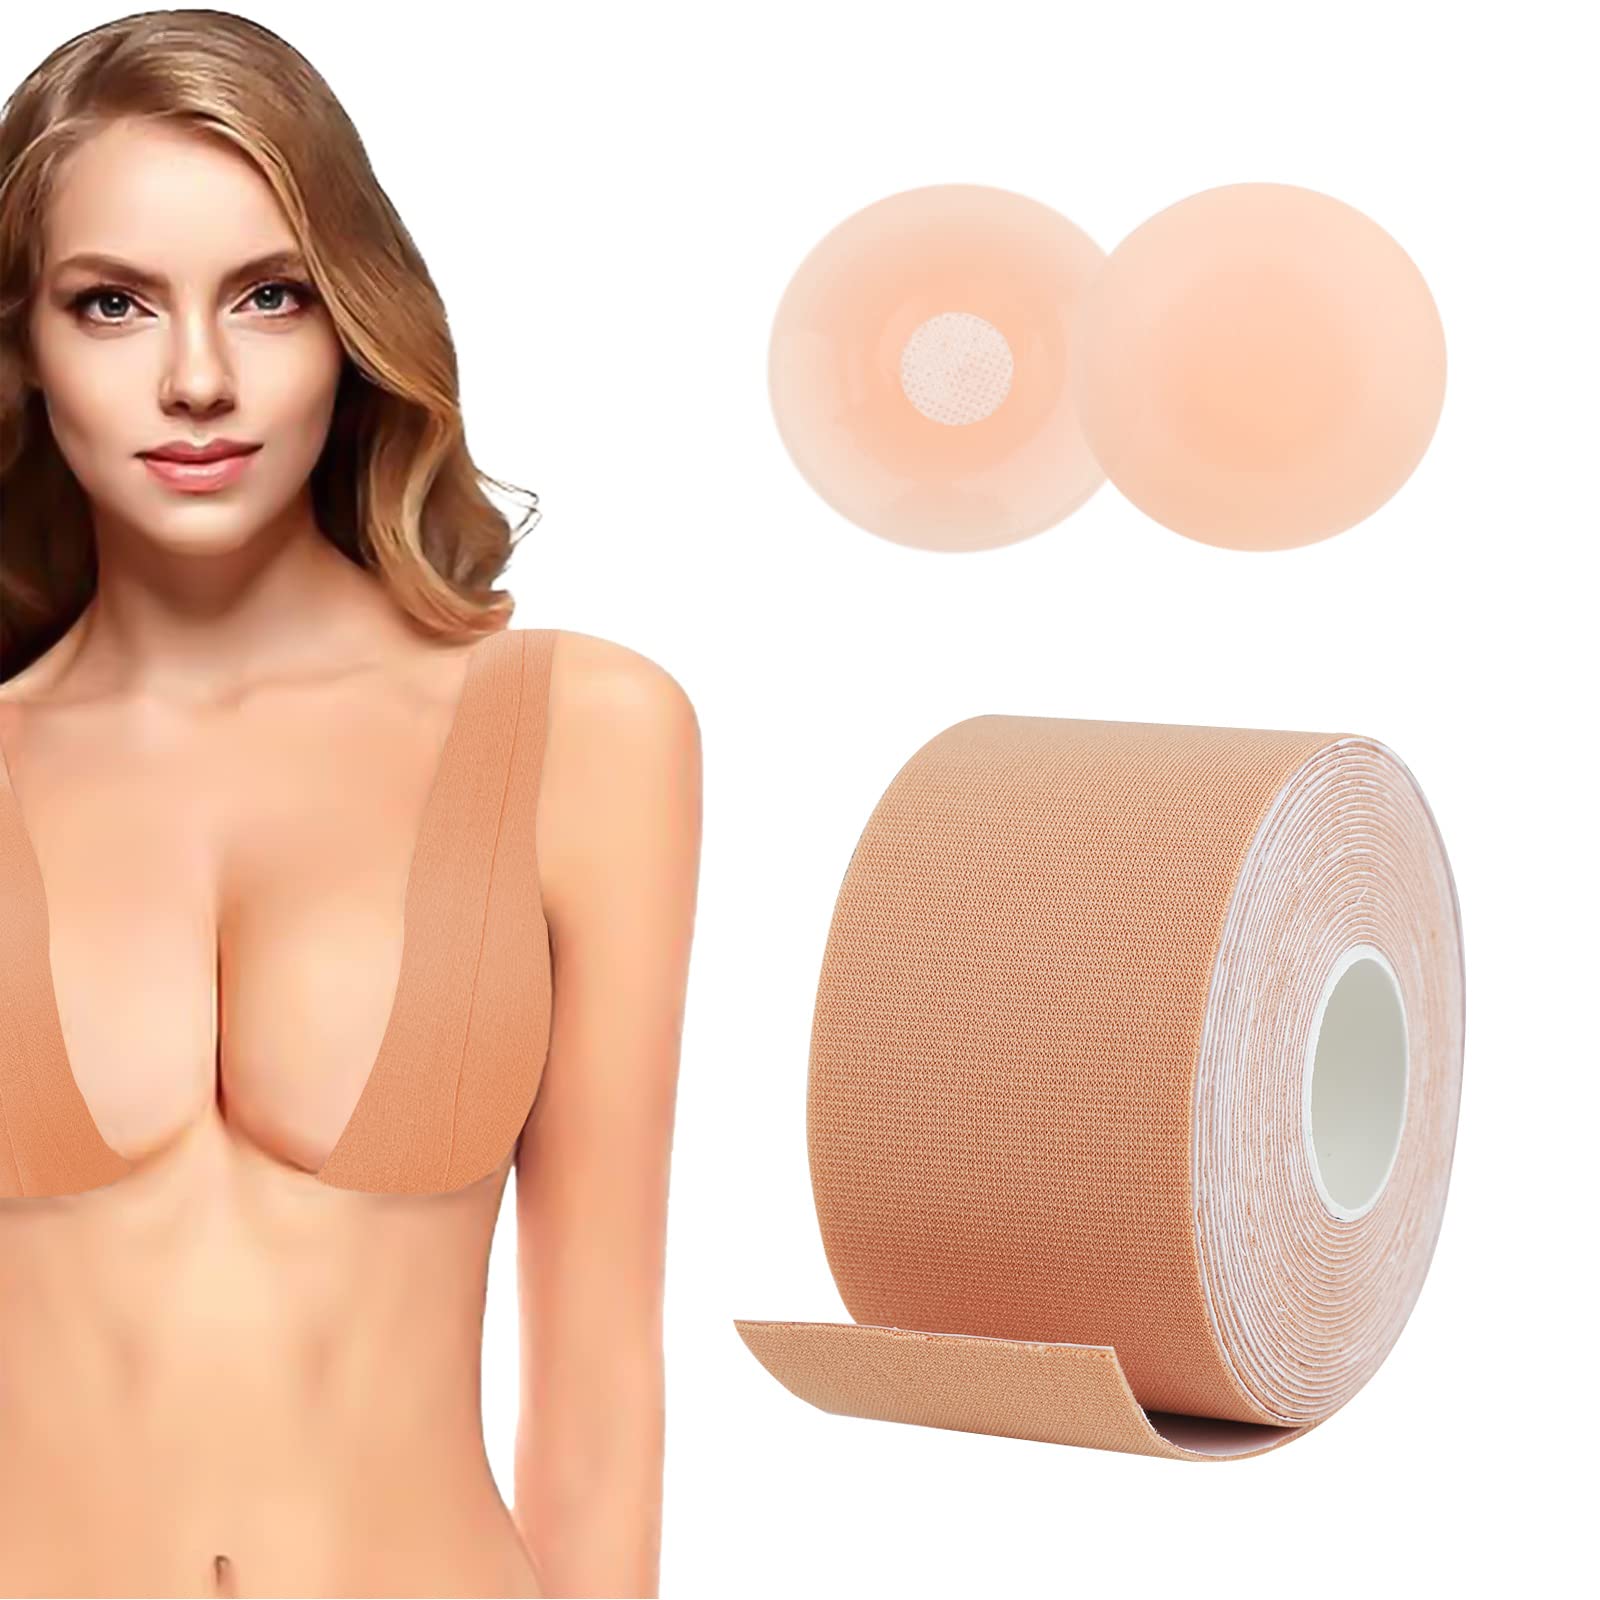 REFUN Boob Tape, Boobytape for Breast Lift with 2pcs Reusable Silicone Cover,  Bob Tape for Large Breasts A-G Cup Size, Waterproof & Comfortable Breast  Lift Tape, Invisible Under Clothing Beige